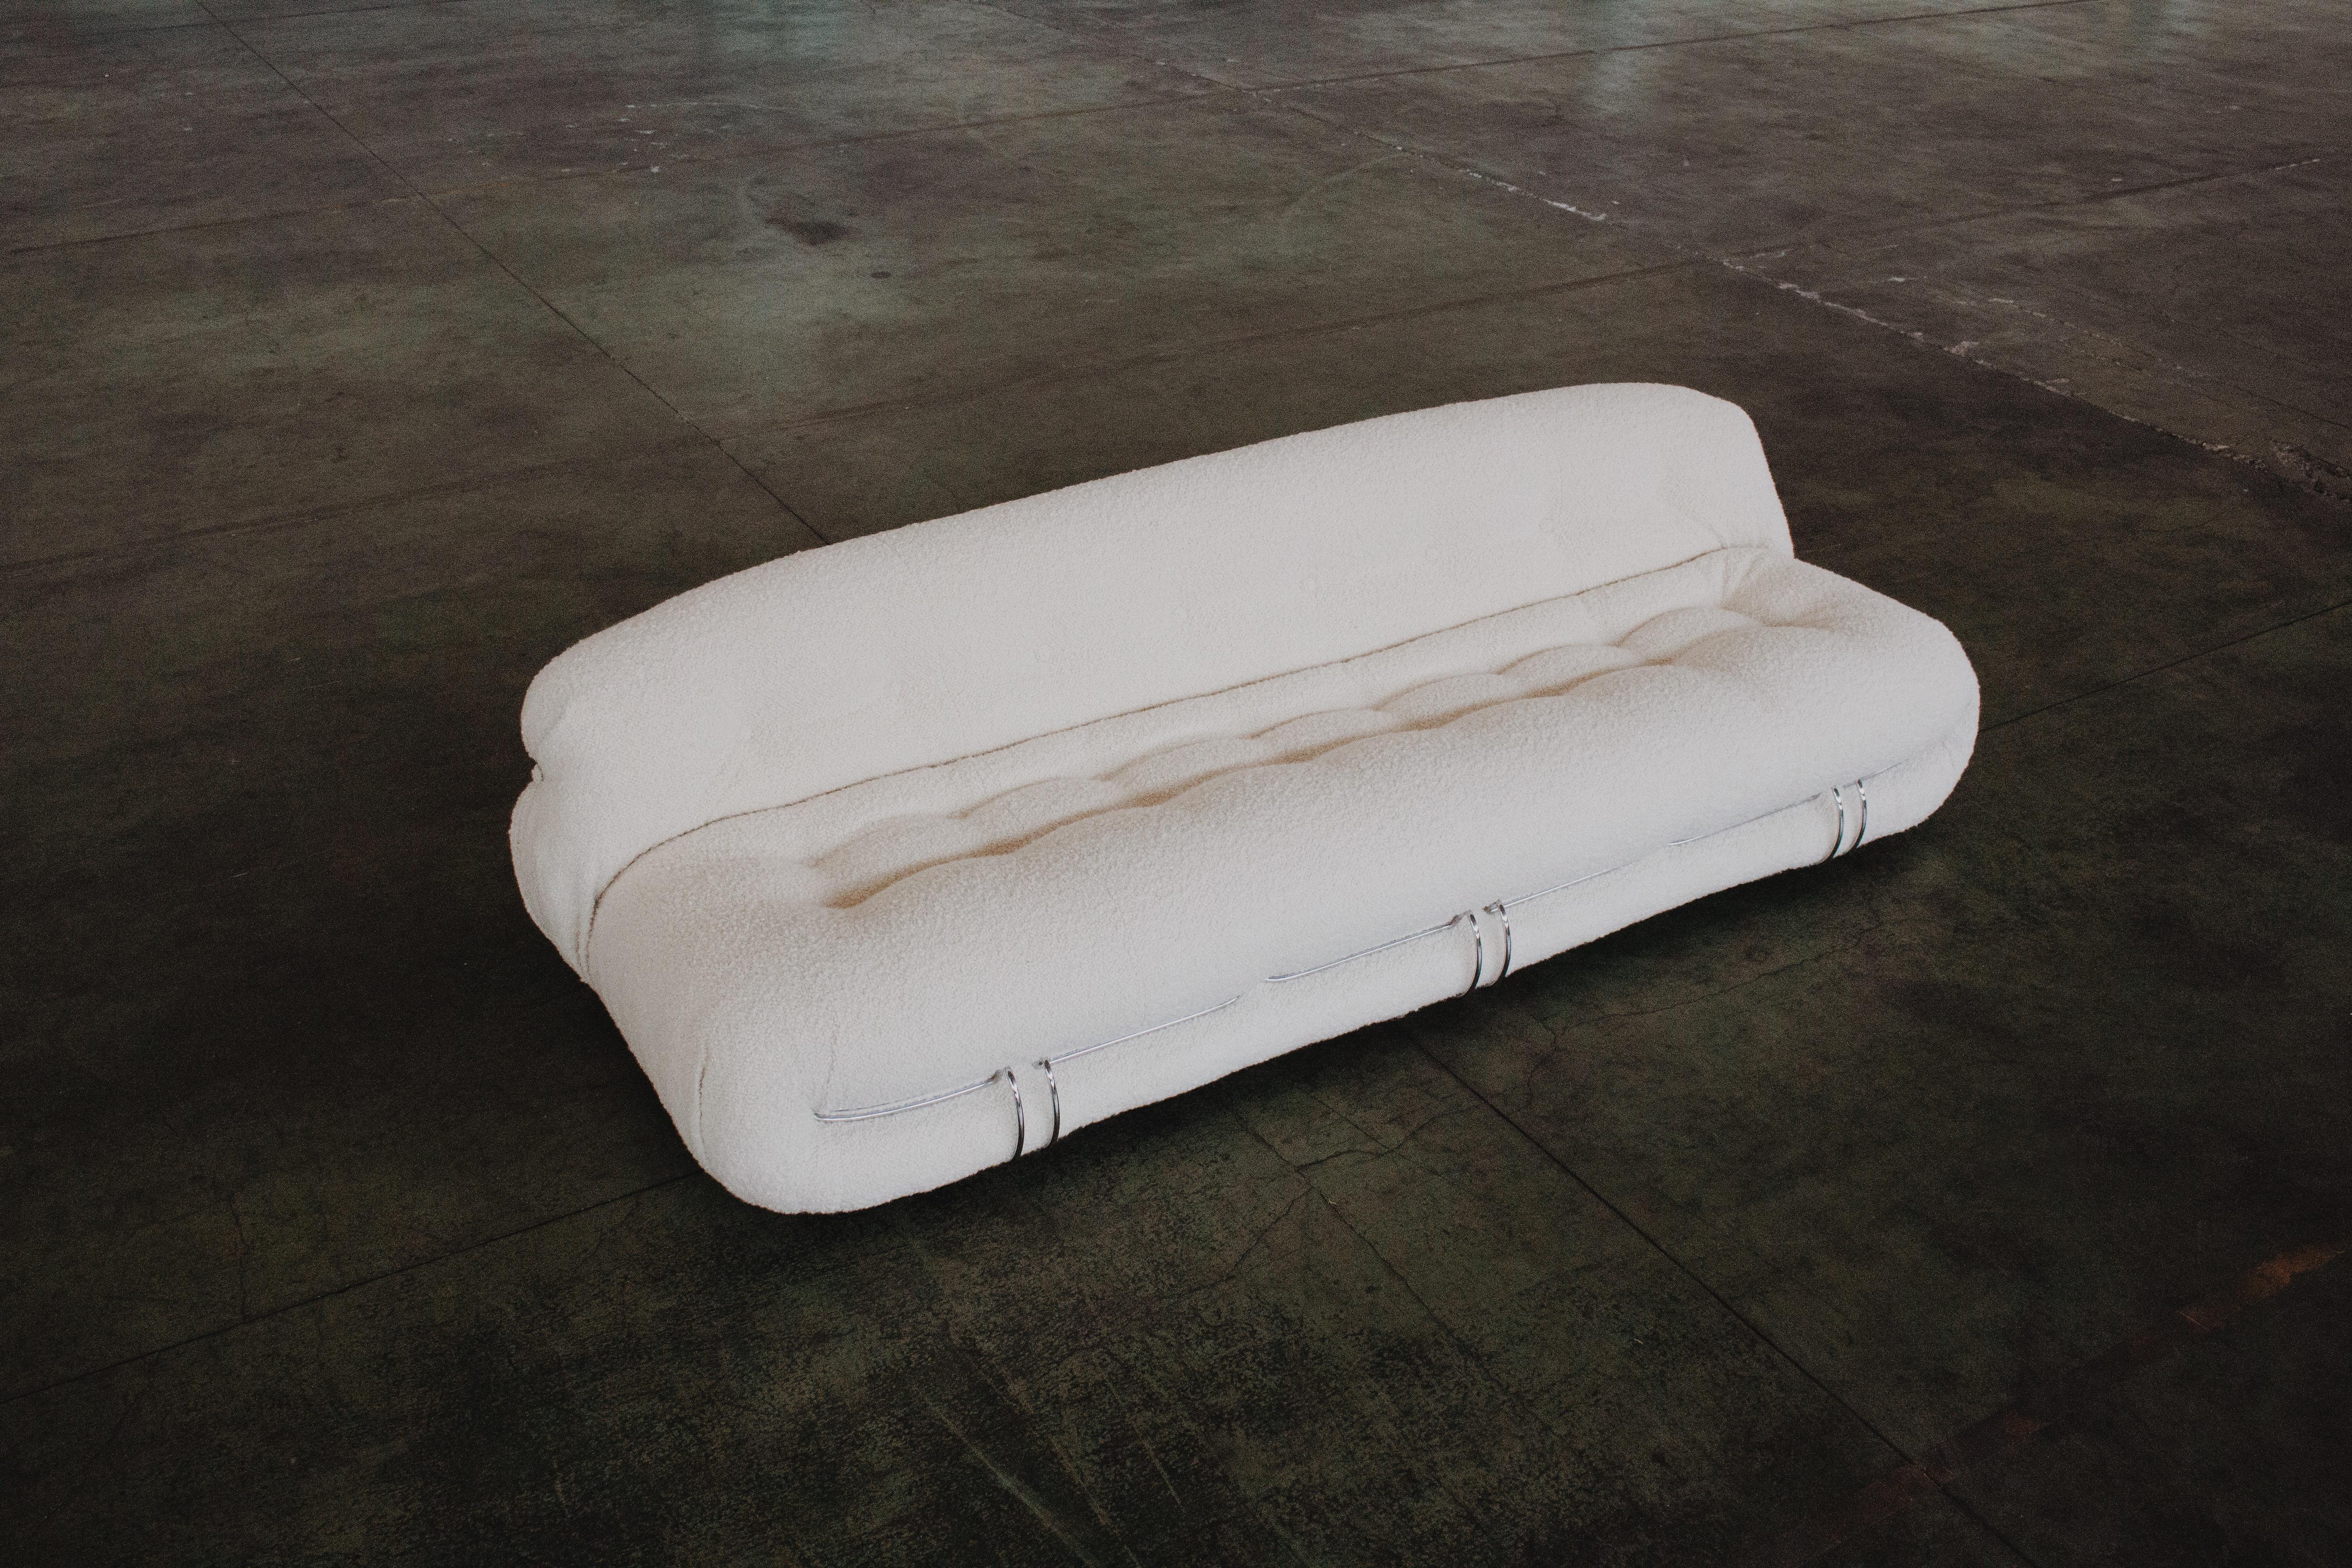 Mid-Century Modern Afra & Tobia Scarpa “Soriana” Sofa for Cassina, Bouclé Wool, 1969 For Sale